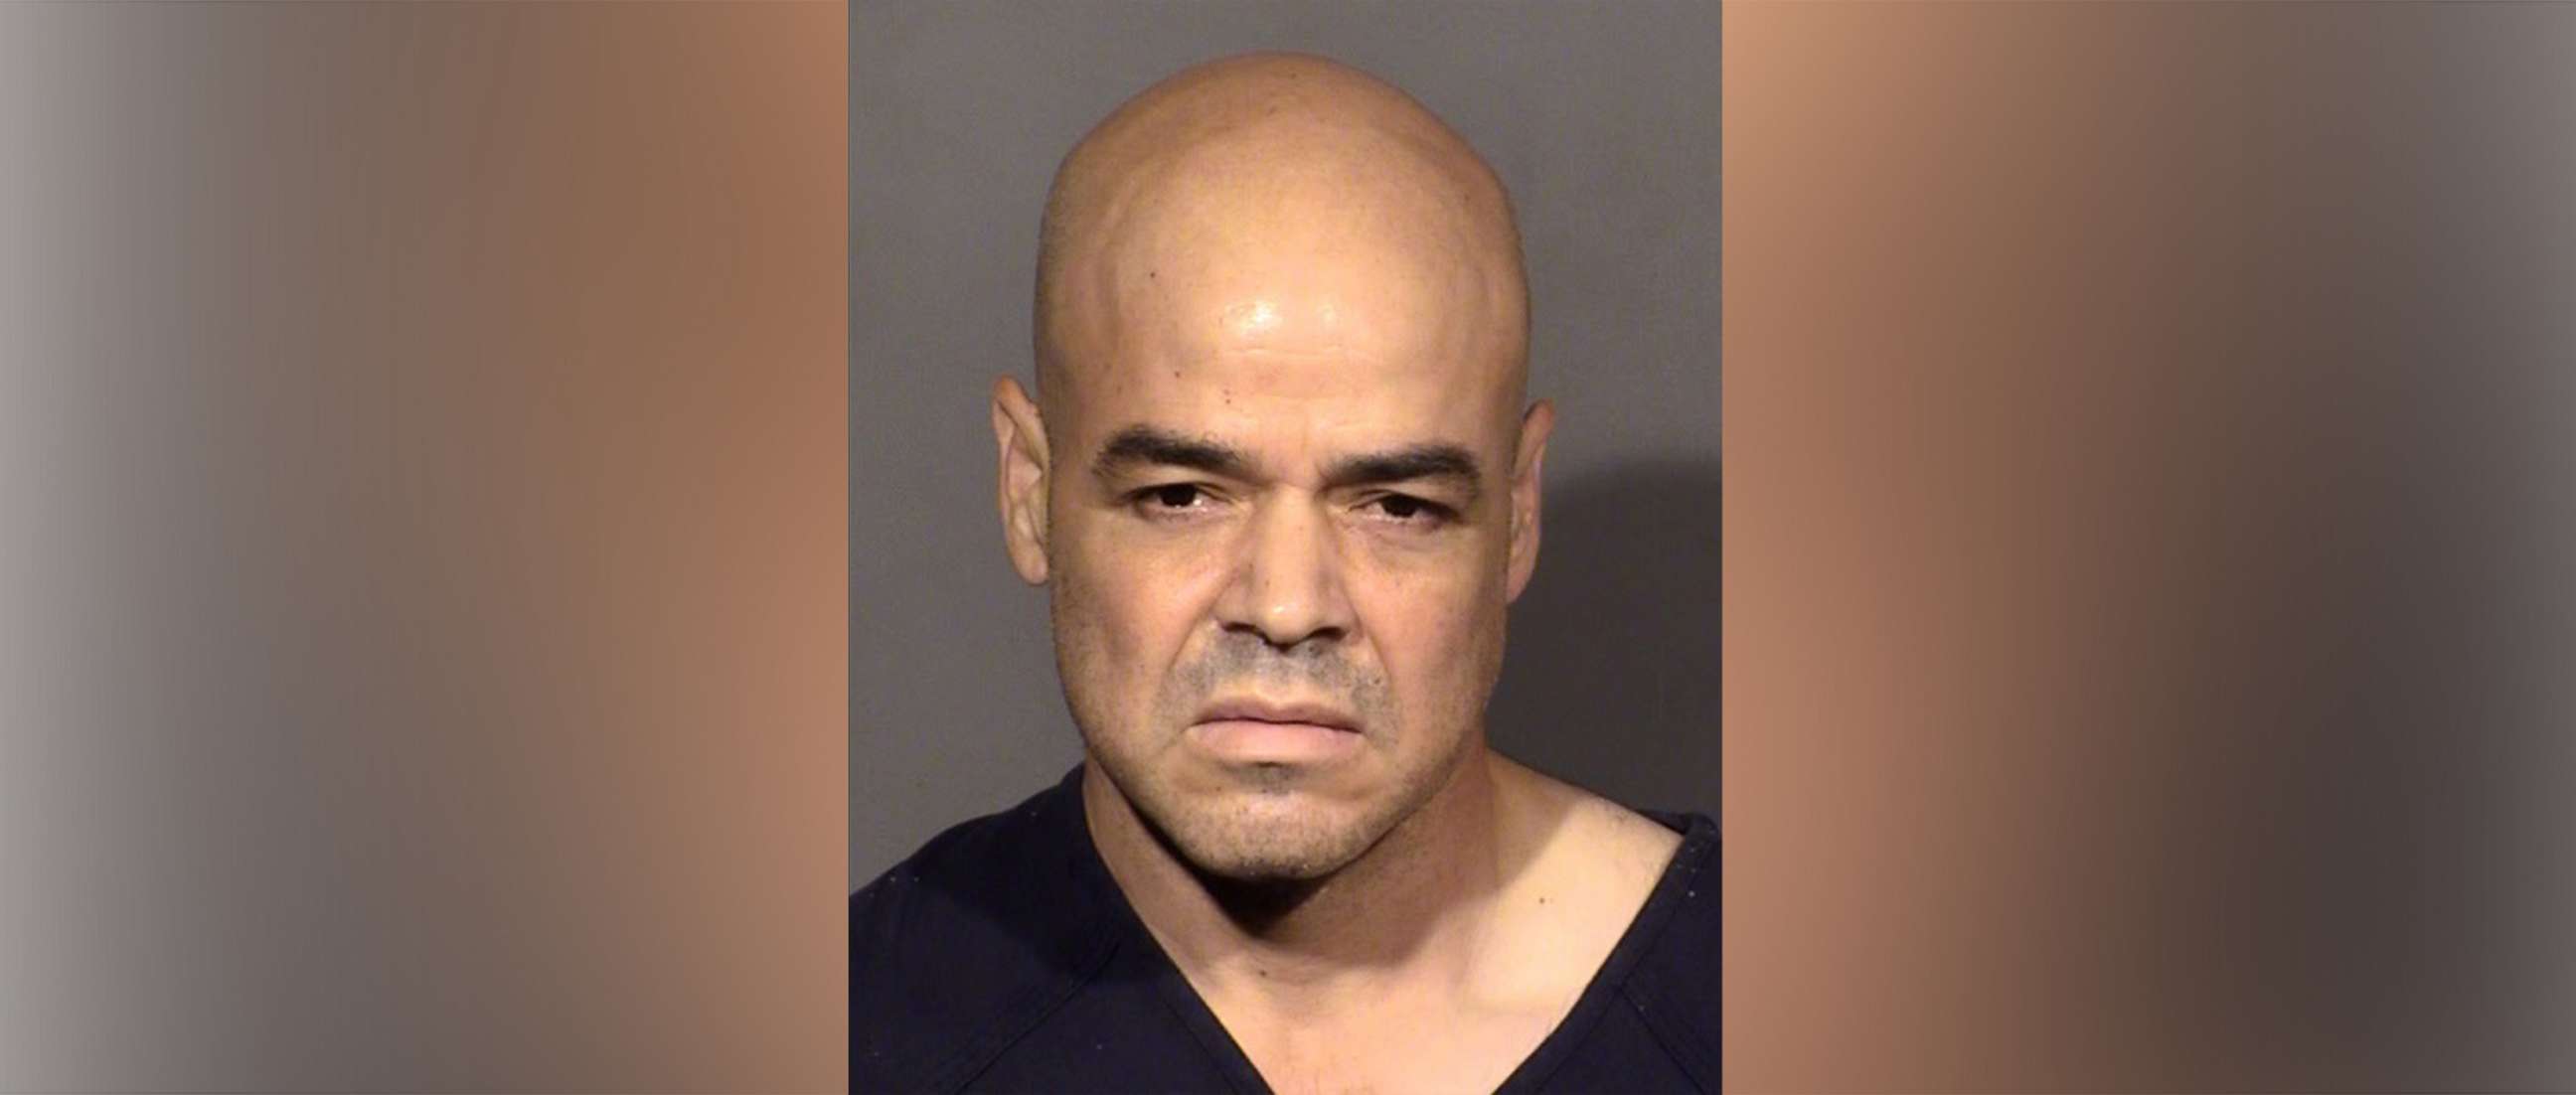 PHOTO: Robert Telles, a suspect wanted in conncetion with the death of journalist Jeff German, is pictured in an image released by law enforcement in Las Vegas, Sept. 8, 2022.